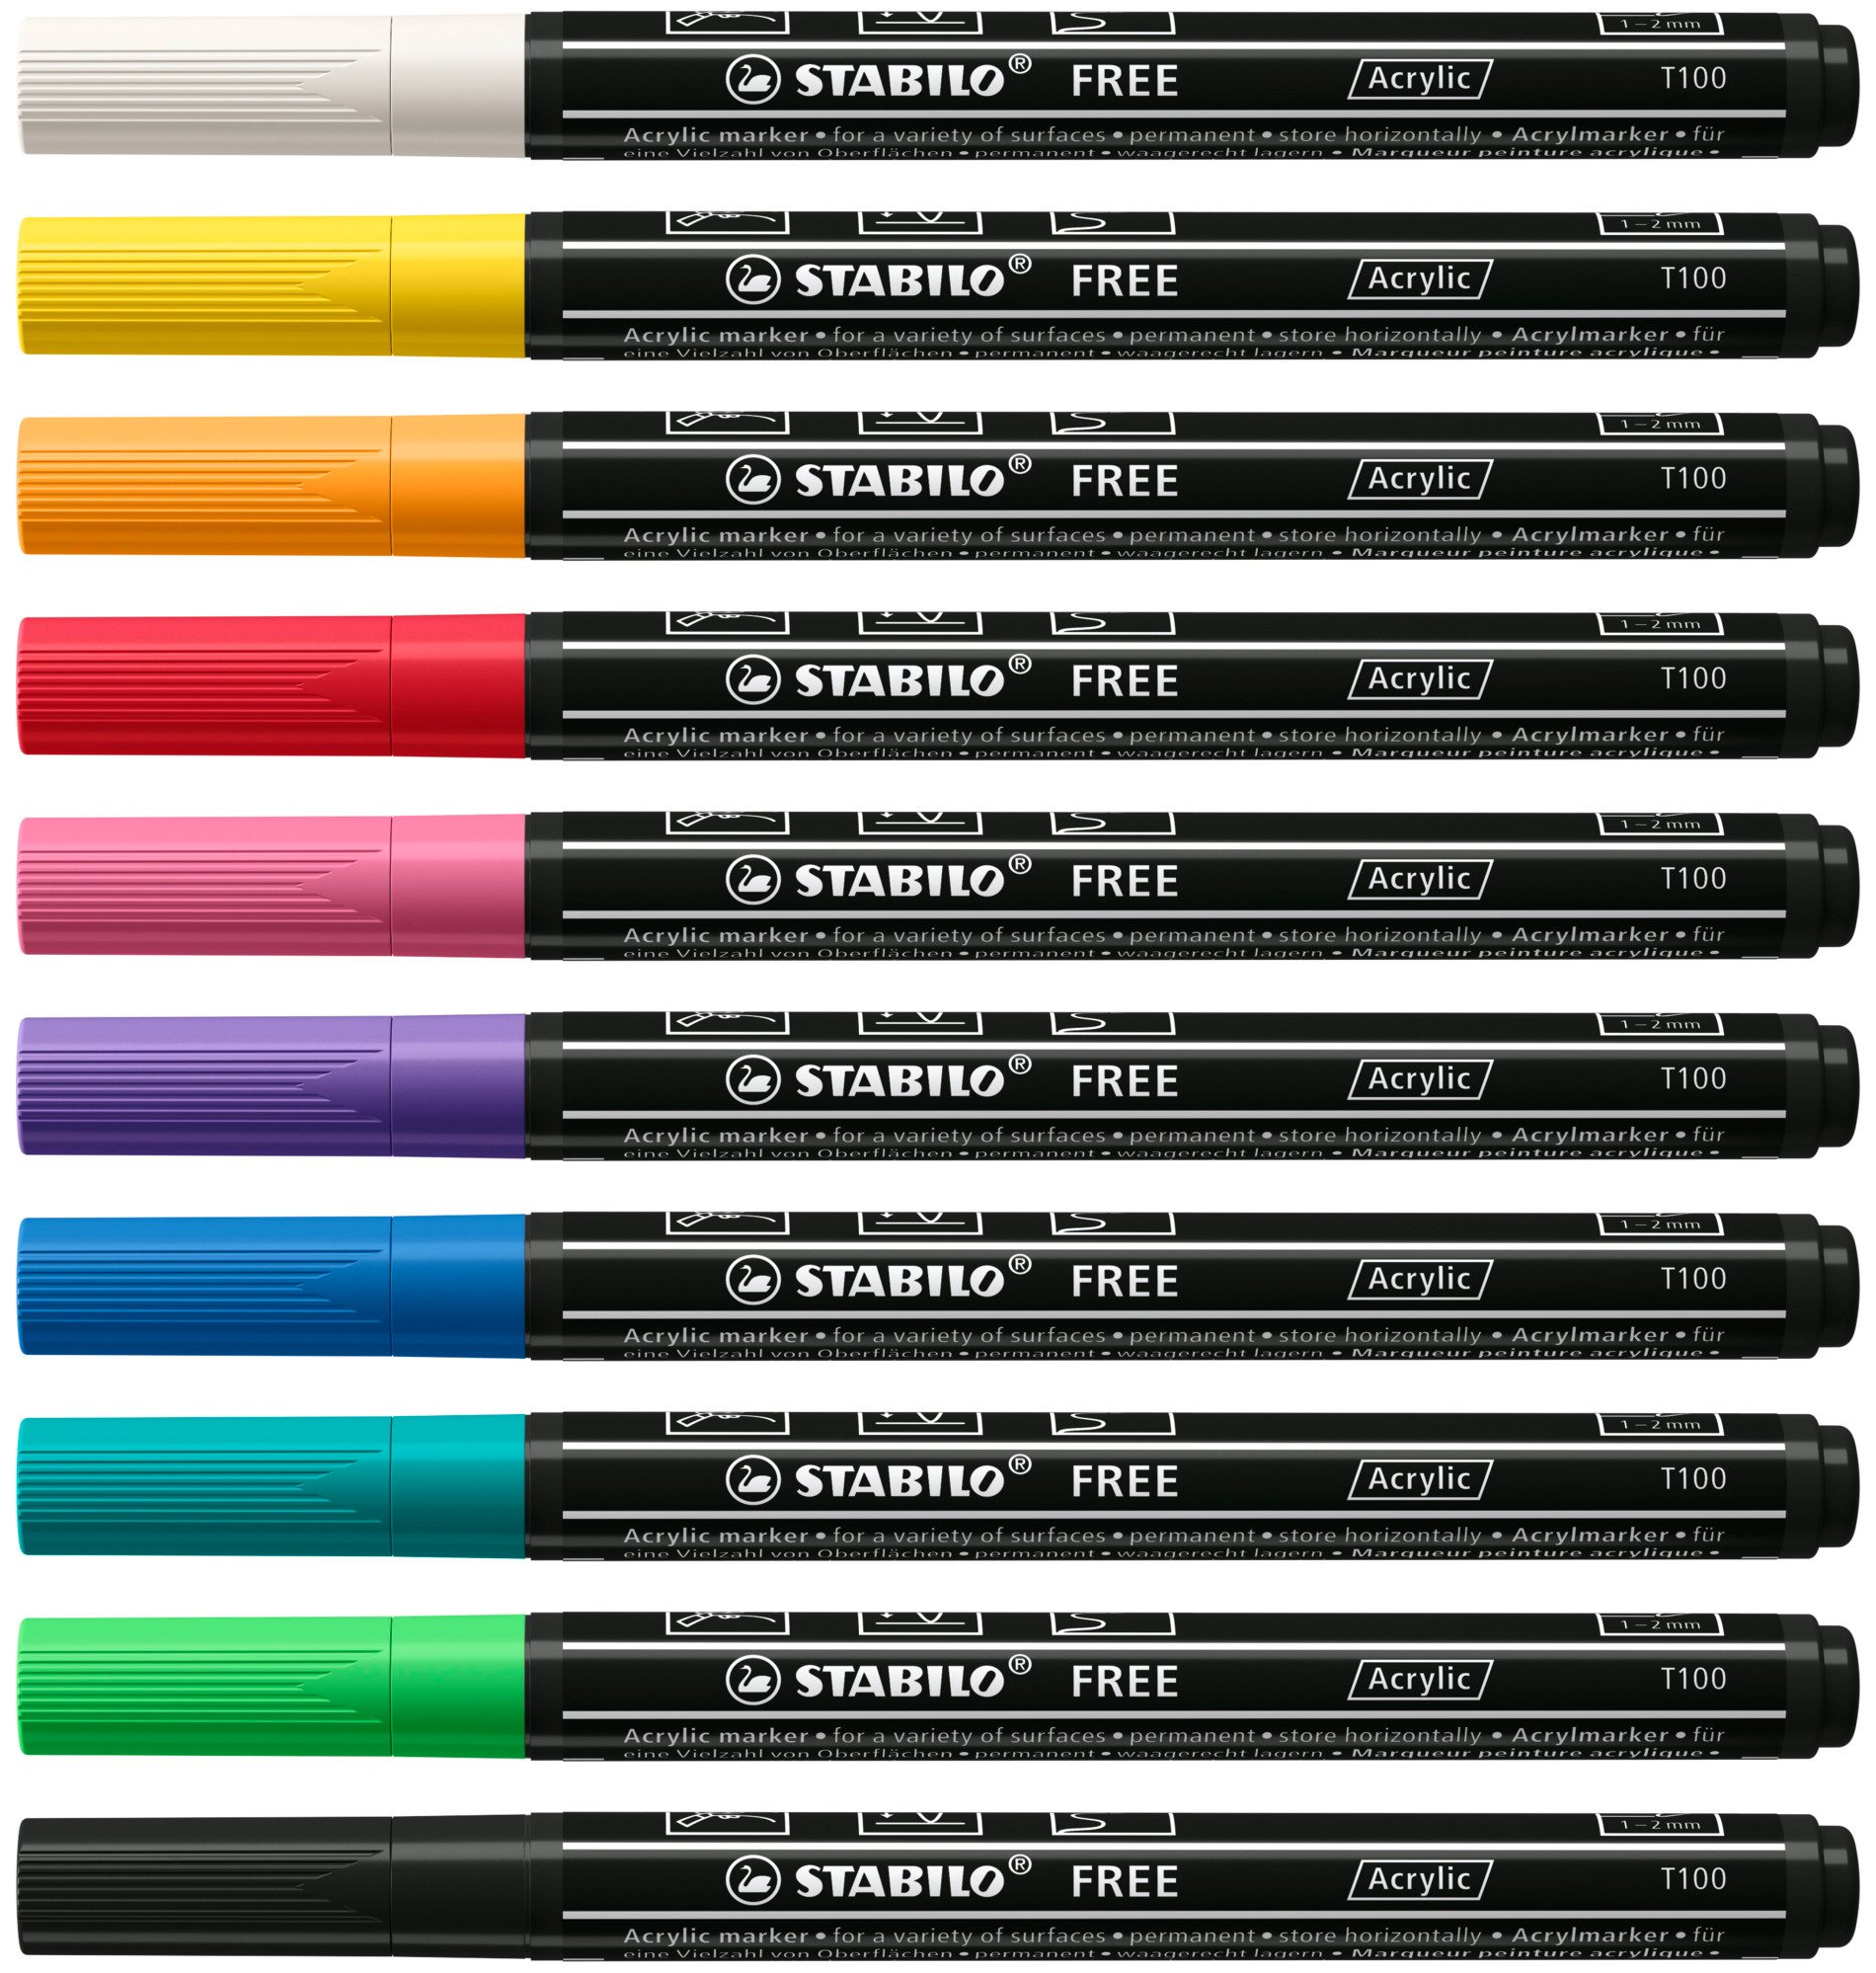 Acrylic marker STABILO FREE Acrylic T300 - pack of 5 colors